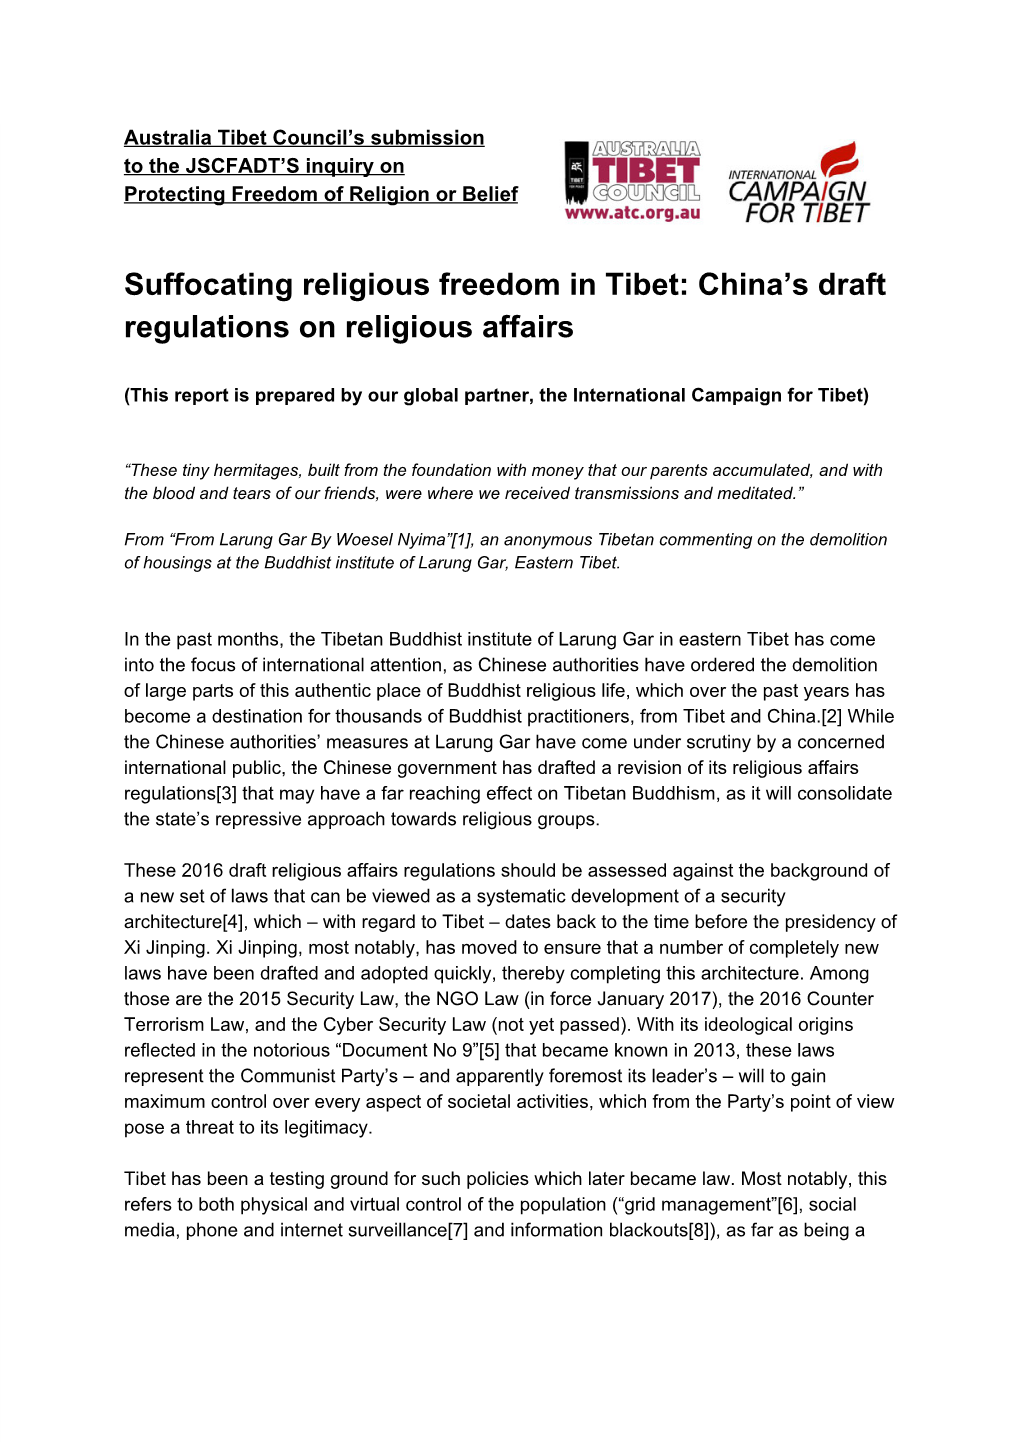 Suffocating Religious Freedom in Tibet: China's Draft Regulations On